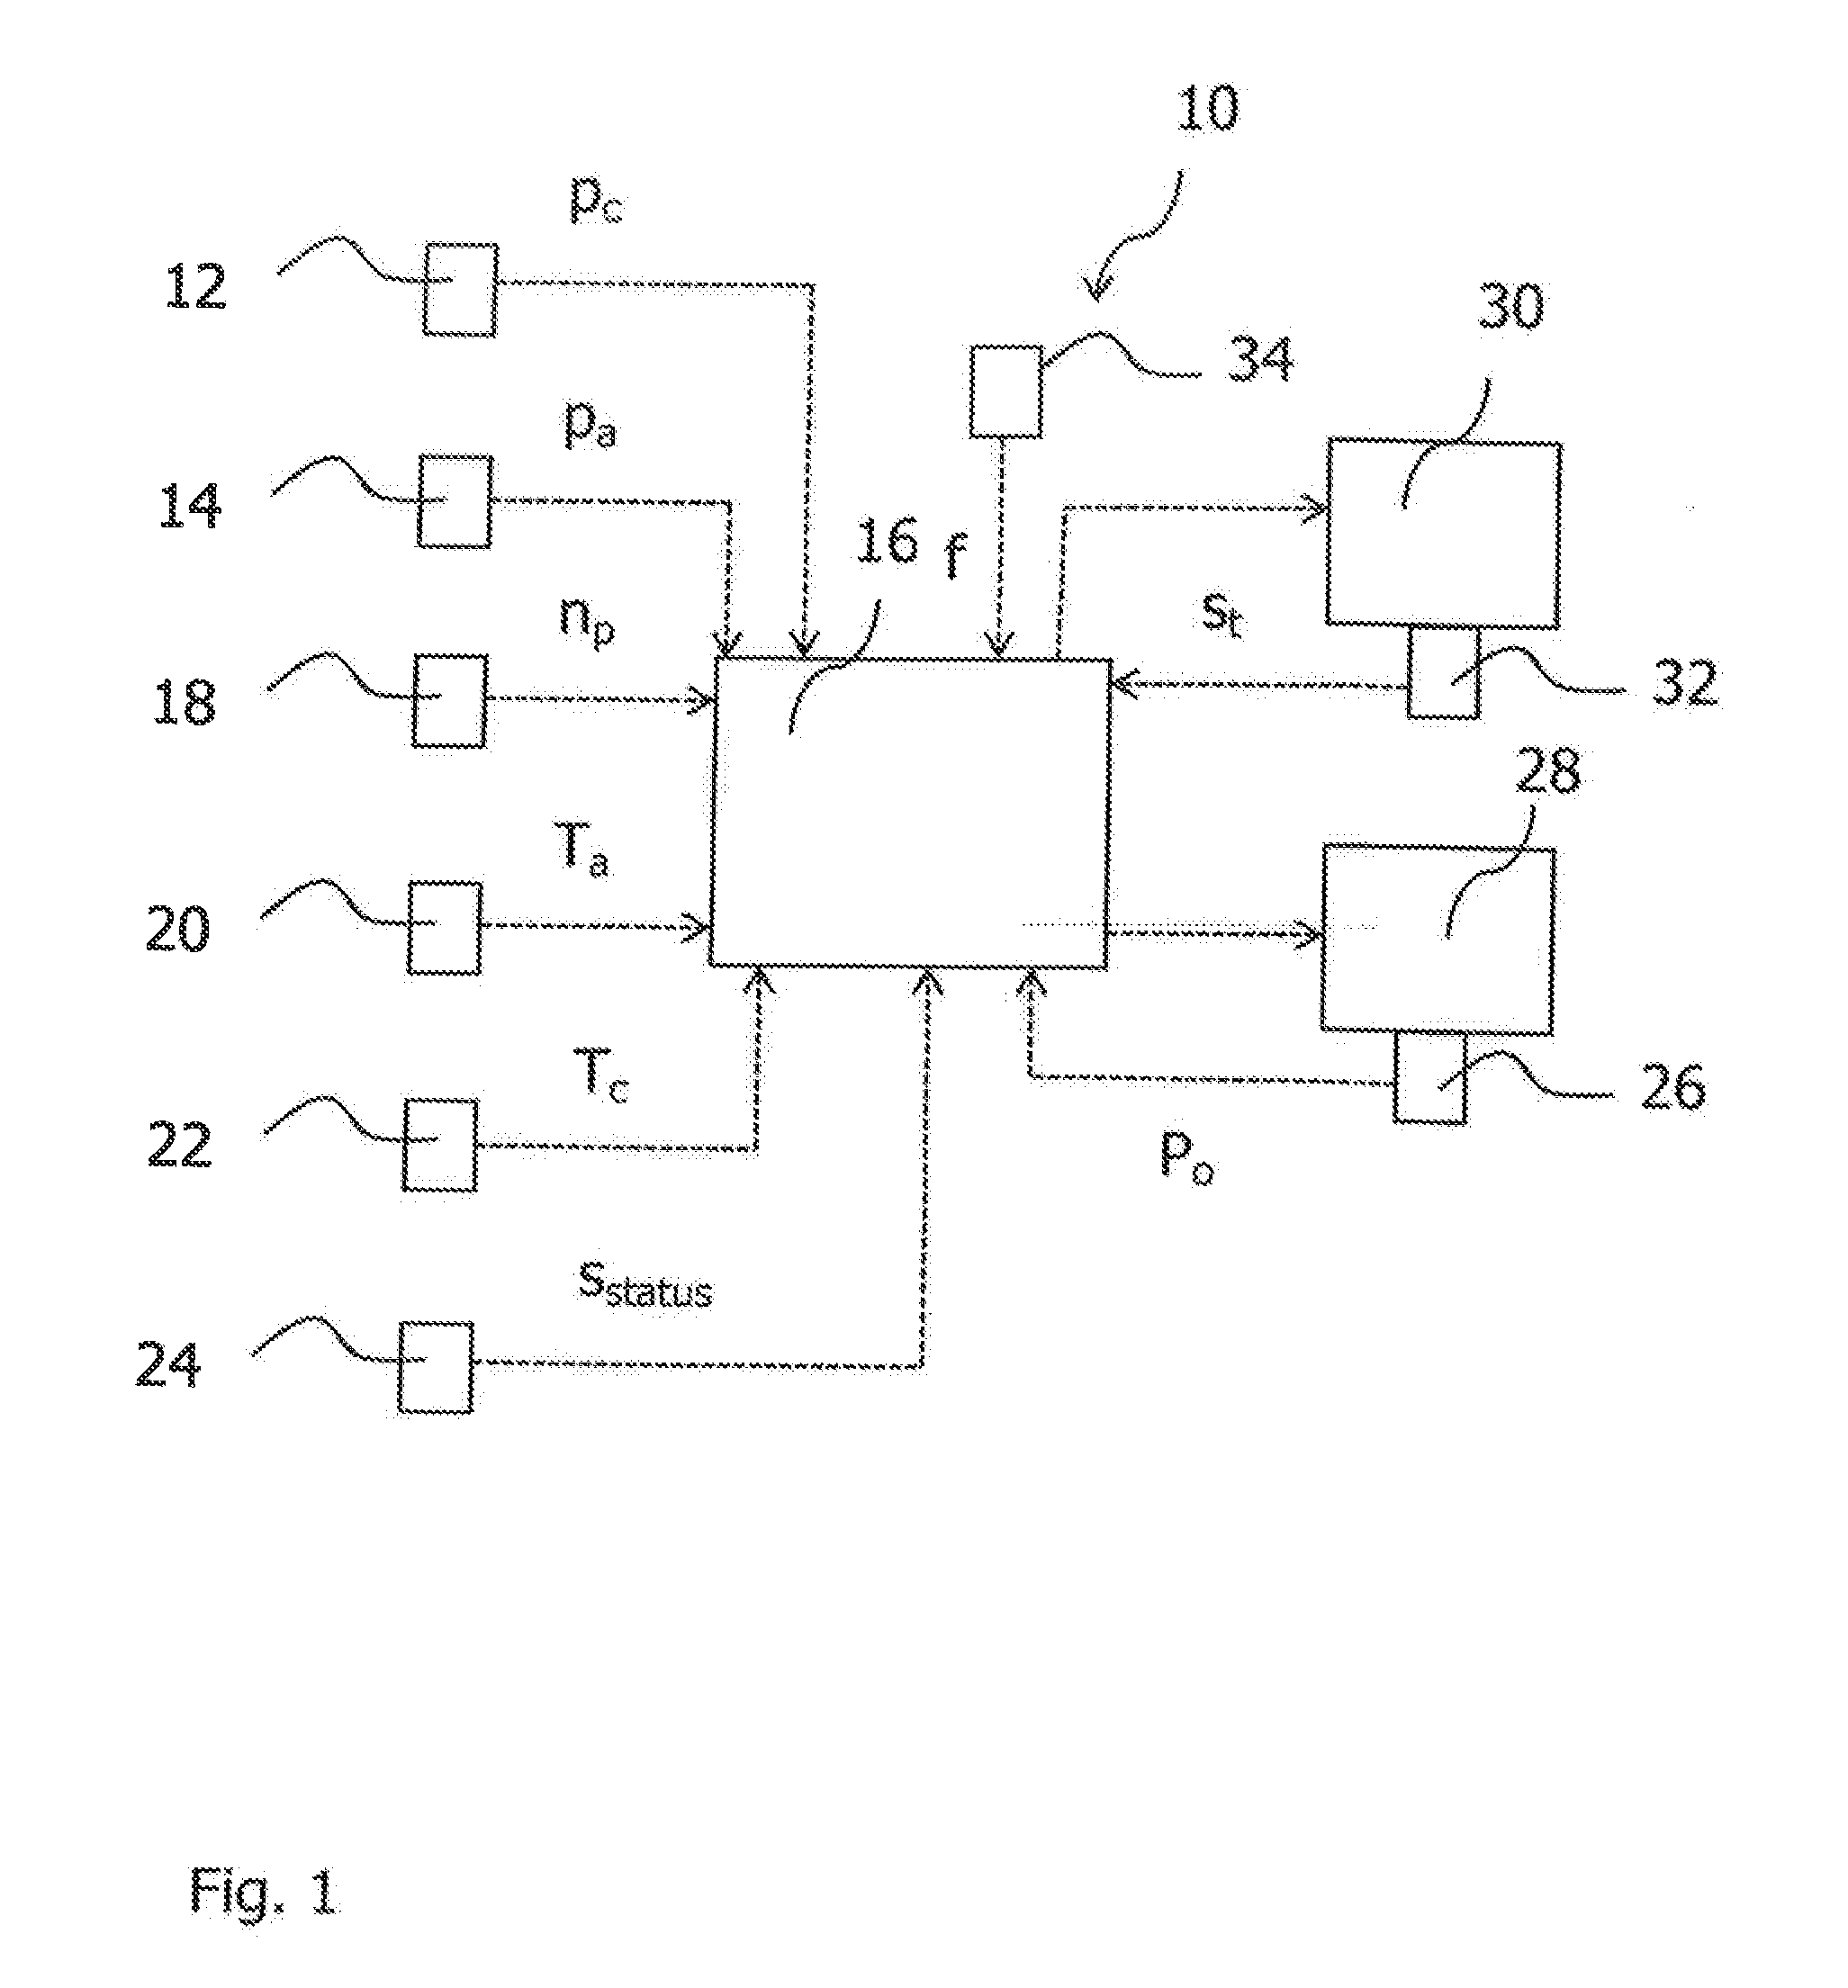 Method and system for emergency ventilating and pressurizing an aircraft cabin